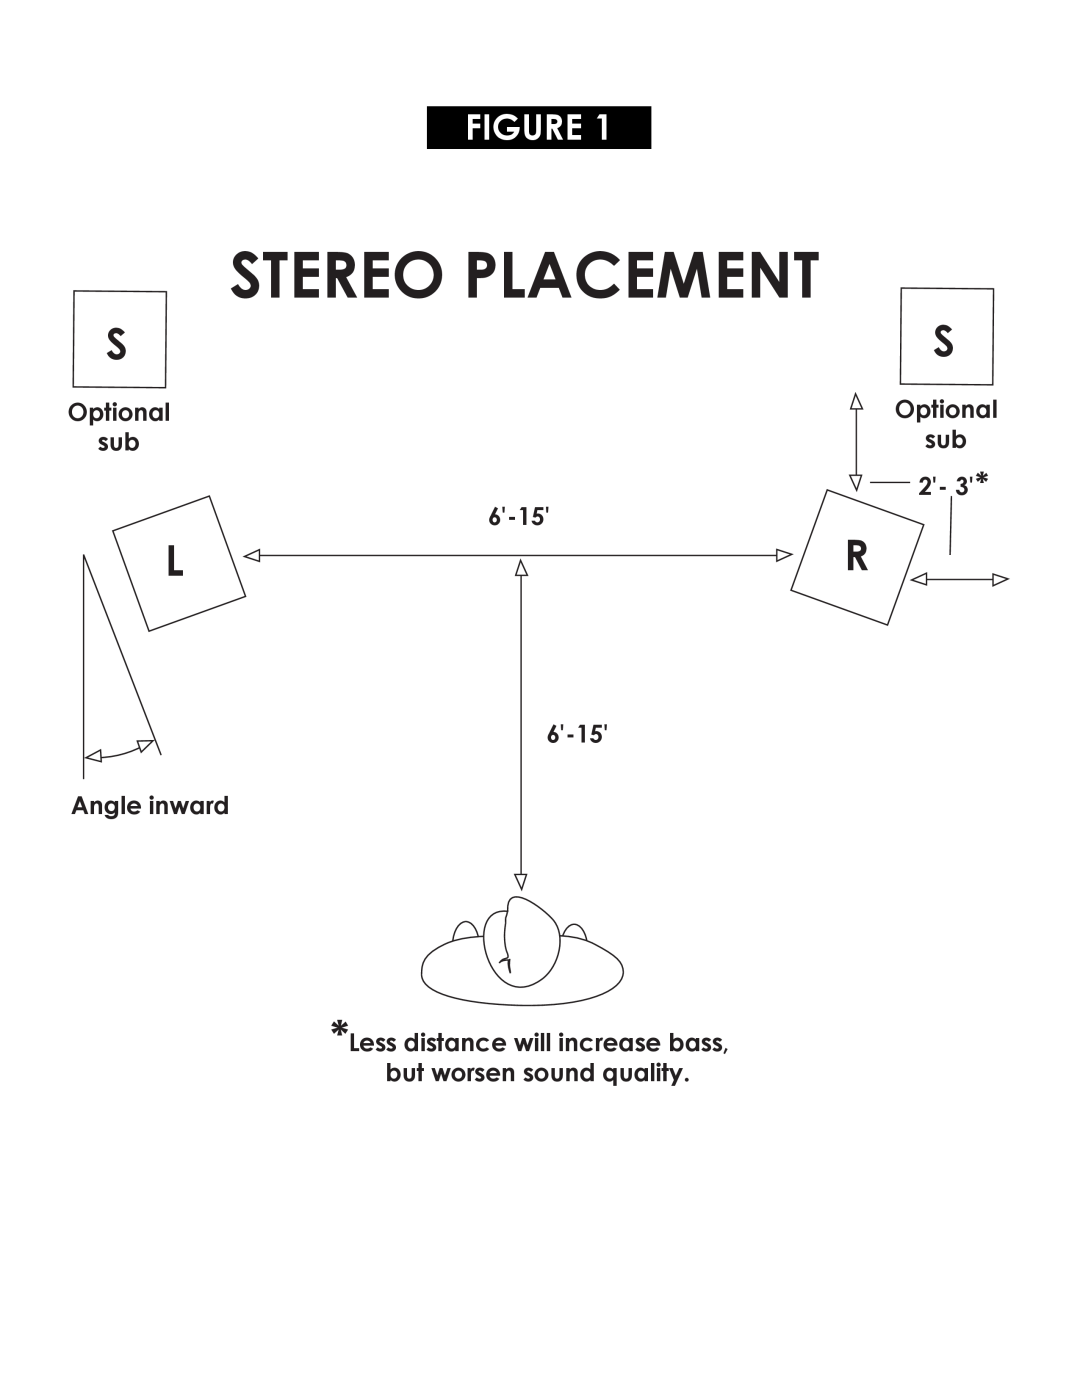 Klipsch POWERED SUBWOOFERS owner manual Stereo Placement, Optional sub, Angle inward 